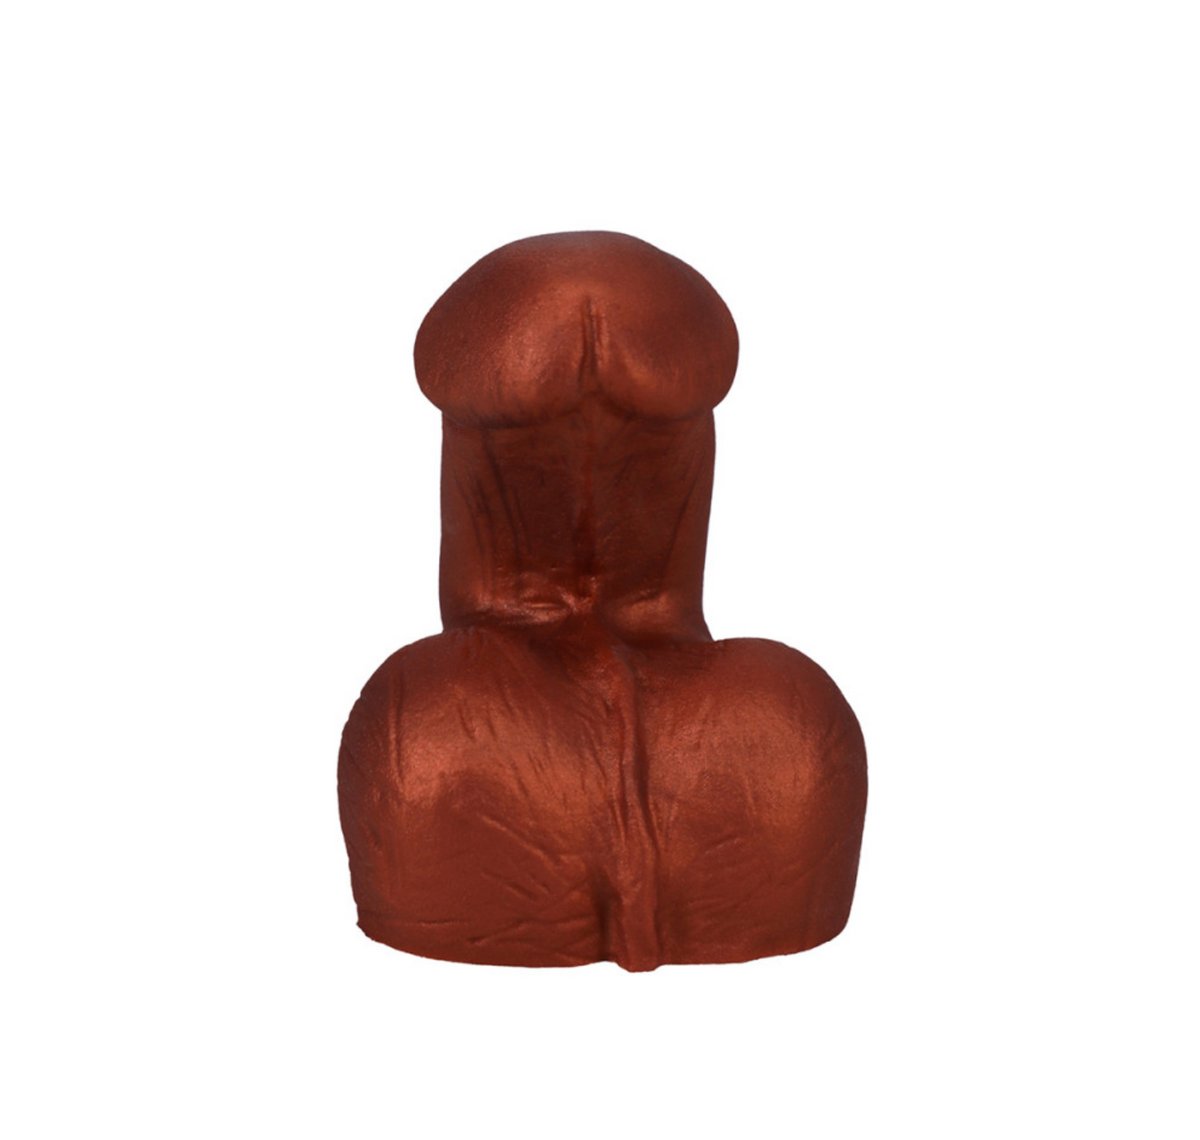 Tantus On the Go Silicone Packer- Super Soft Copper